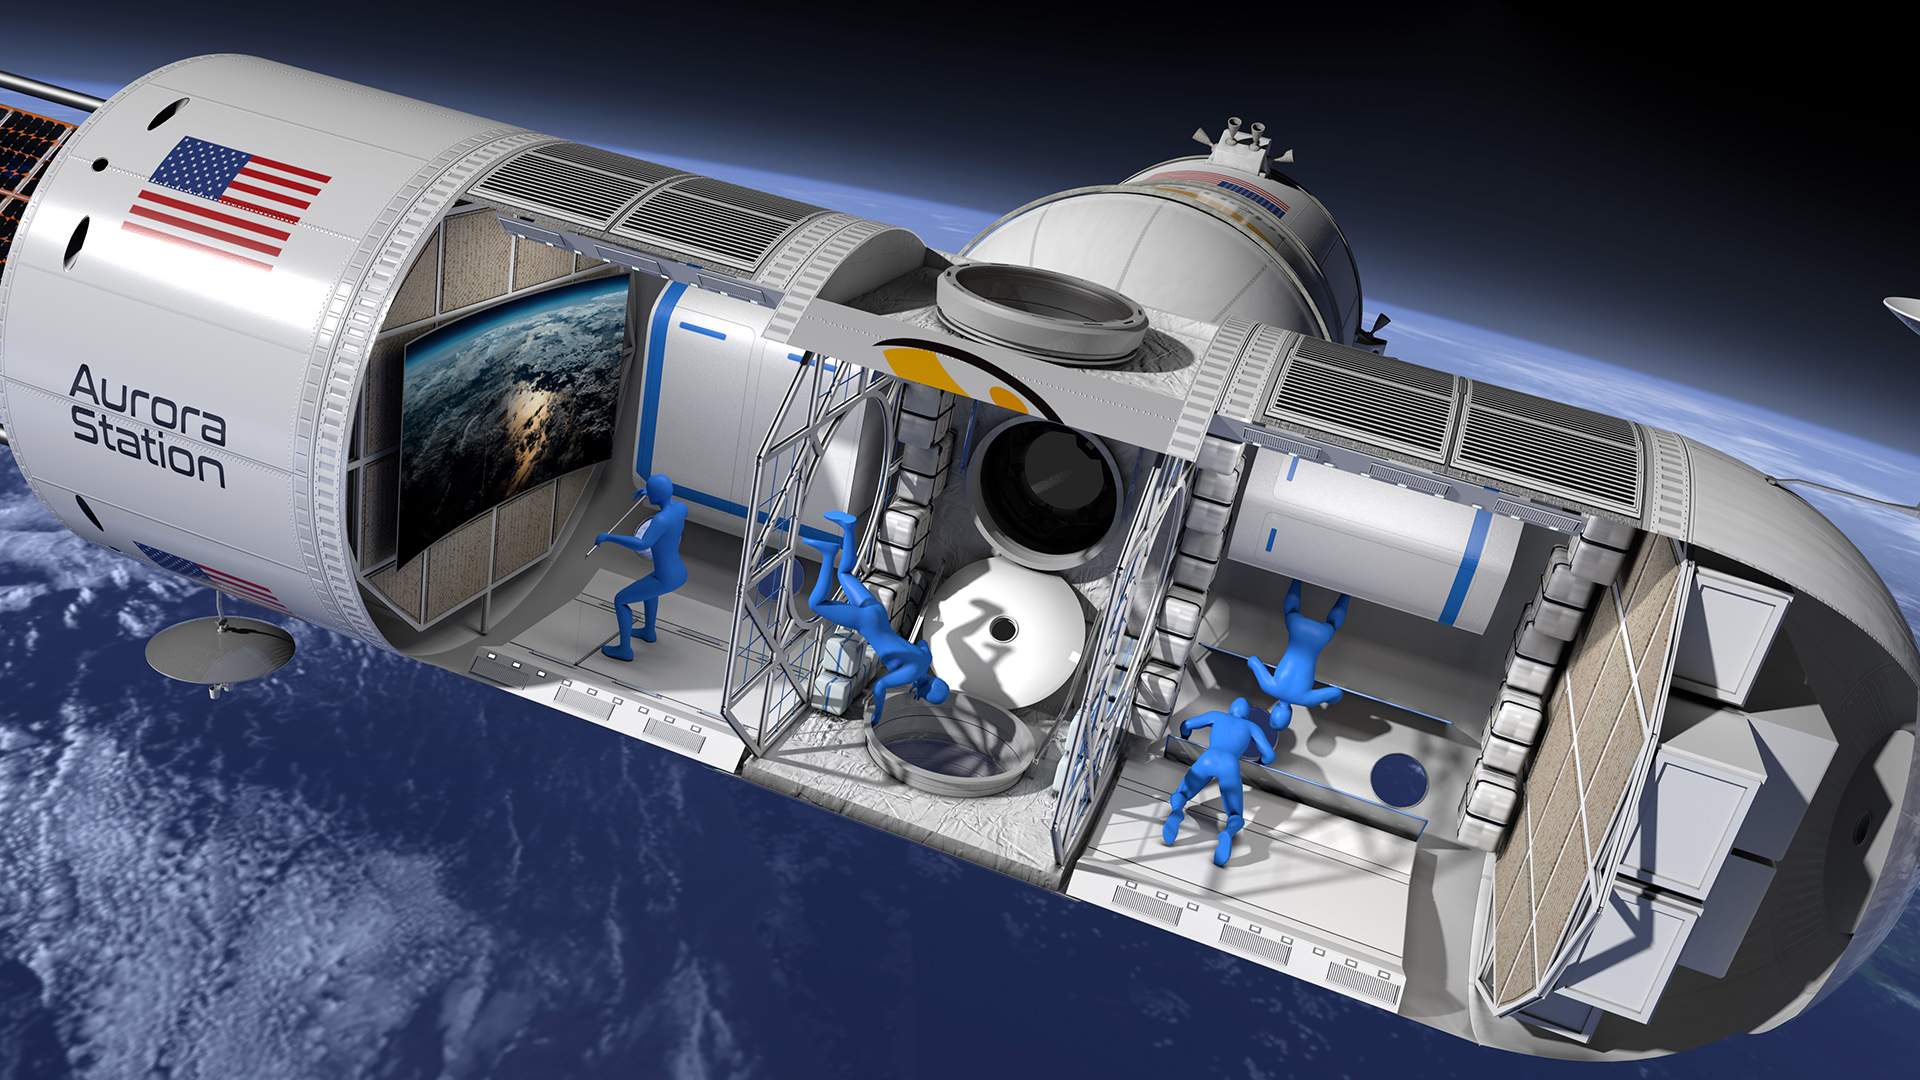 The World's First Luxury Space Hotel Is Set to Open in 2022